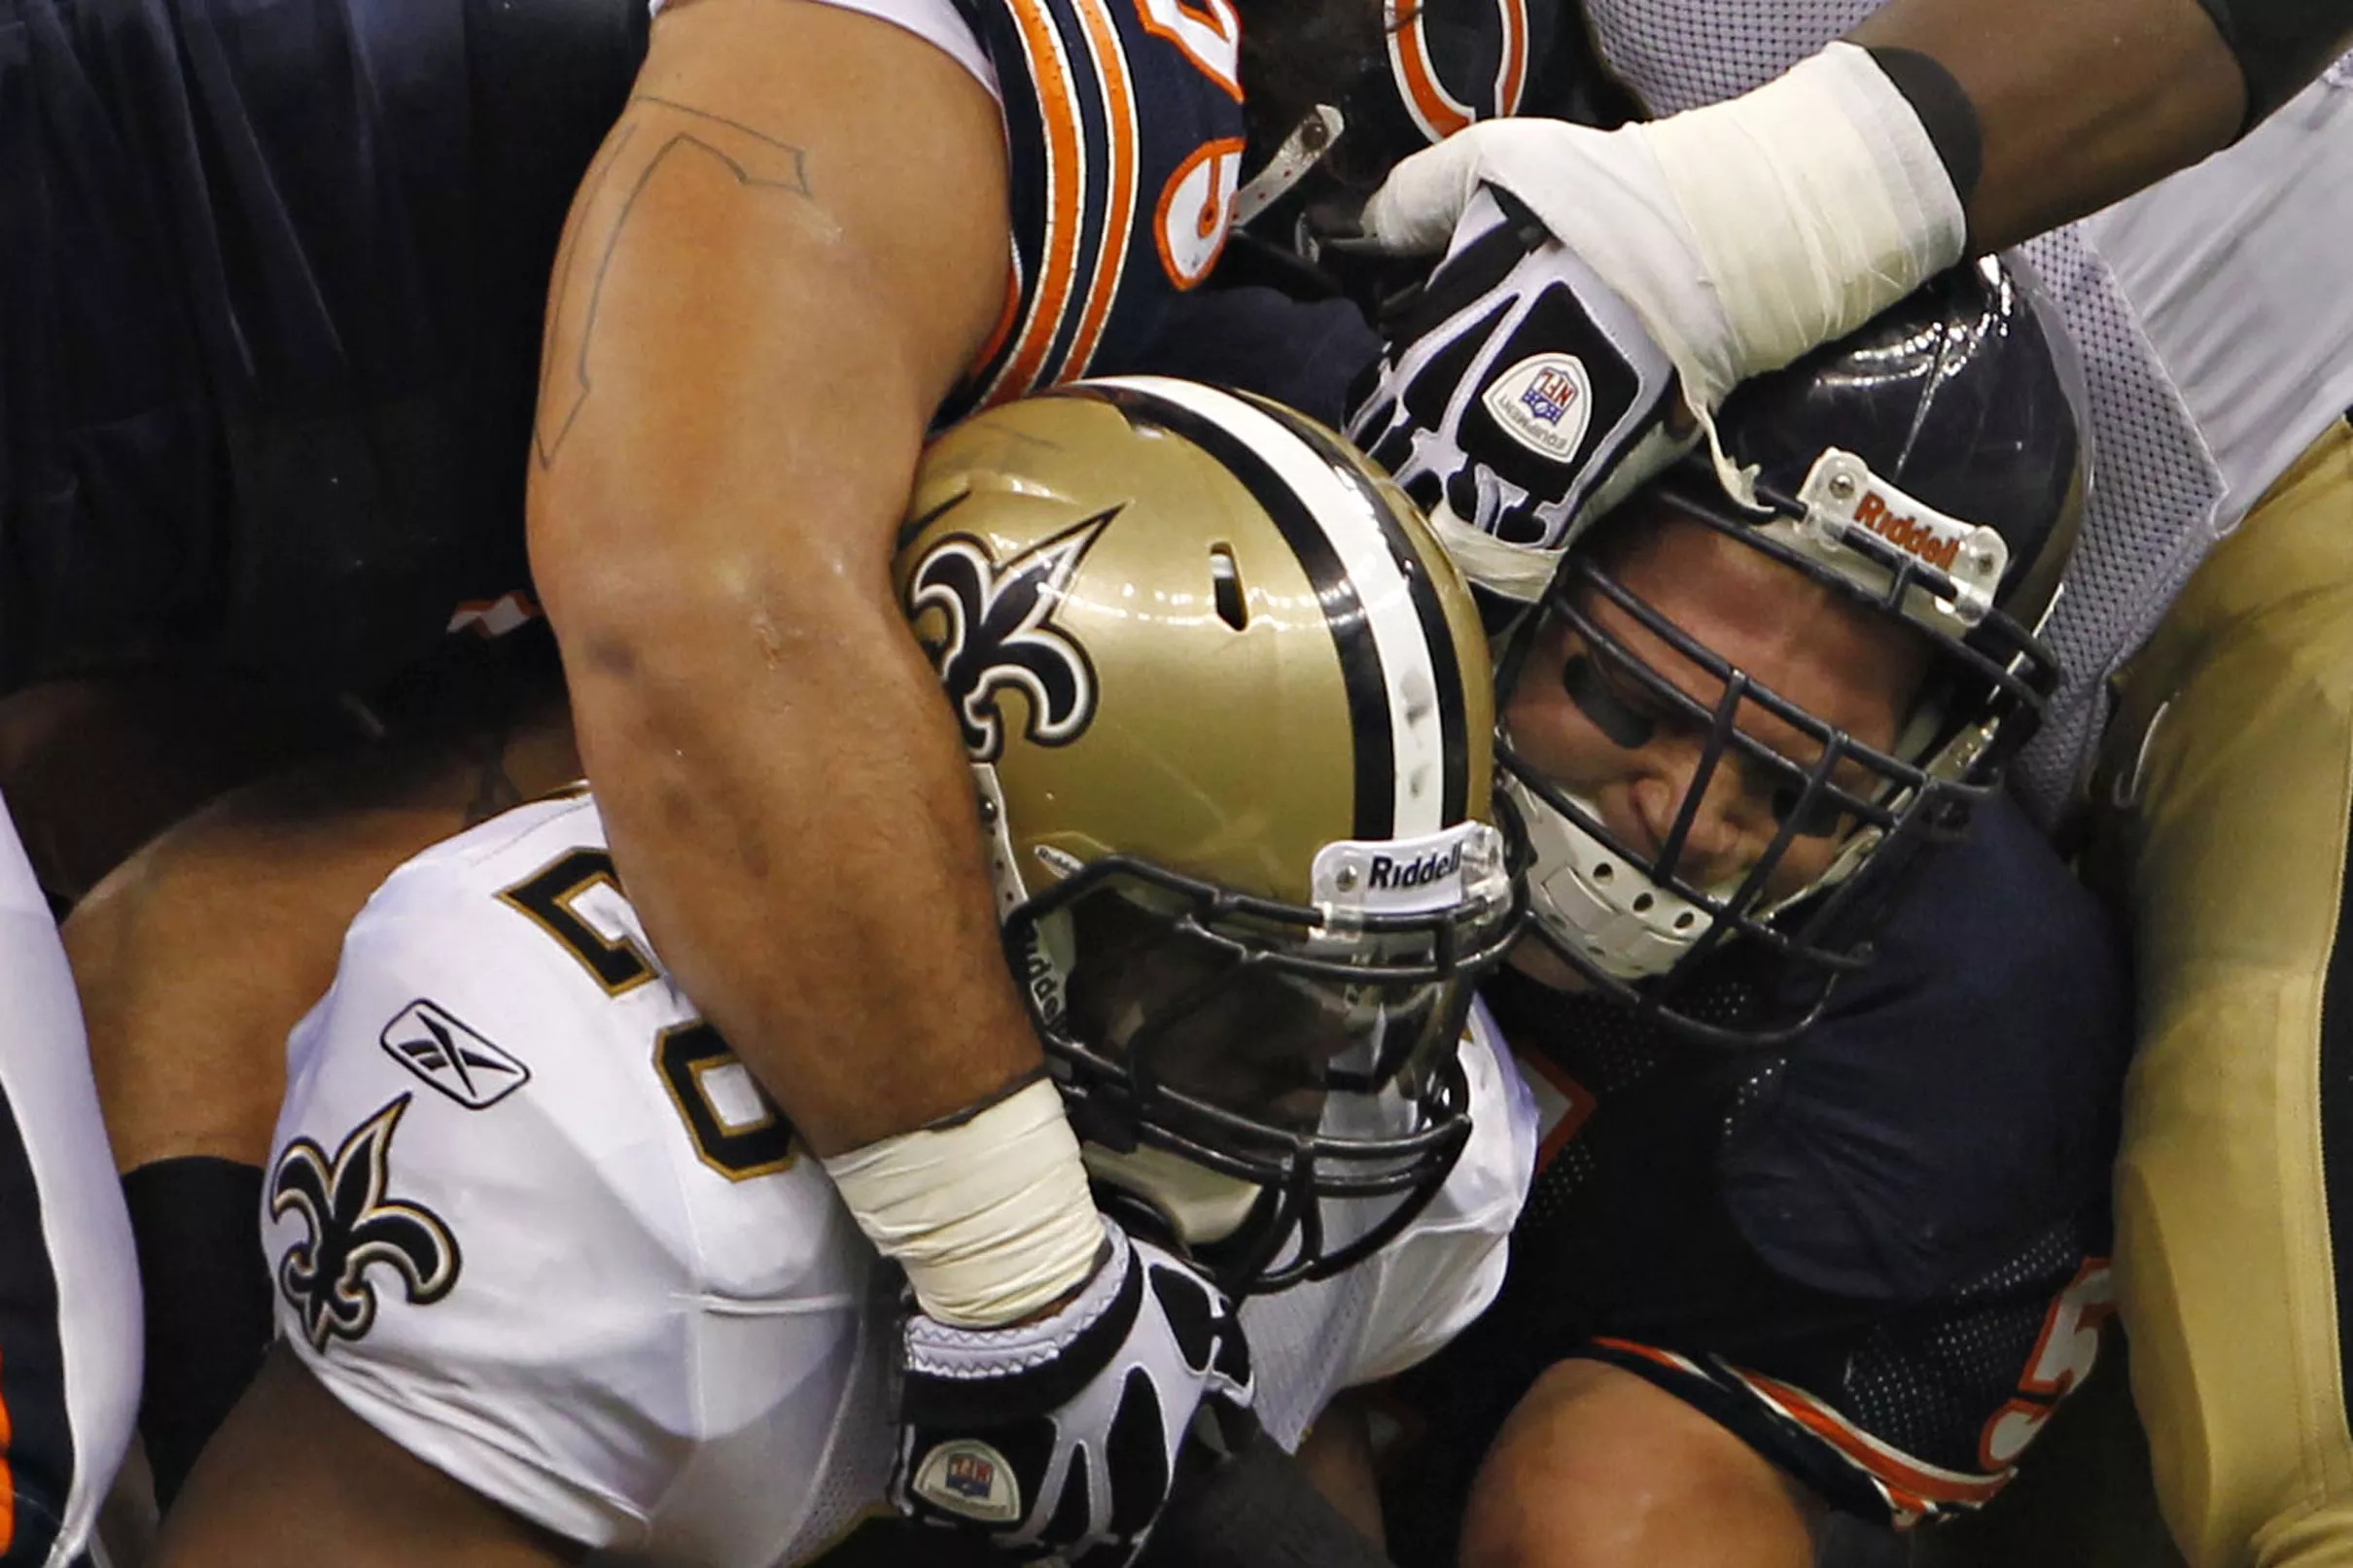 Bears vs Saints TV schedule, previews, odds, streaming and more!